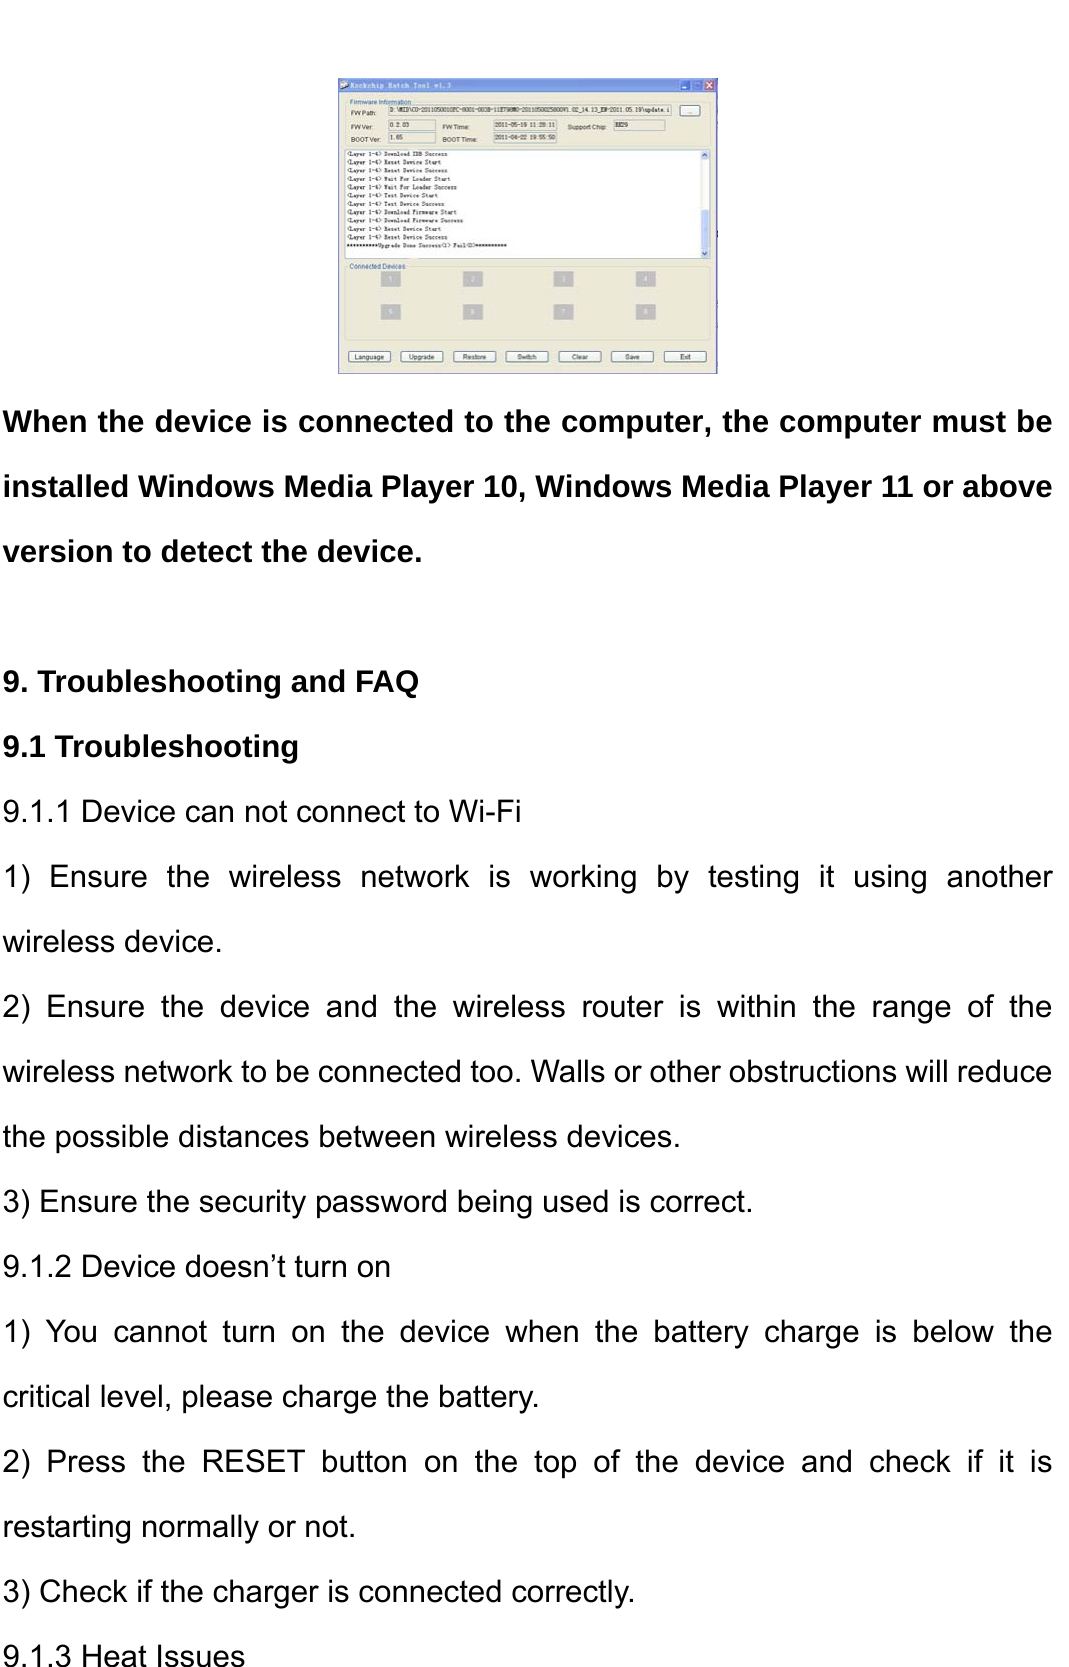     When the device is connected to the computer, the computer must be installed Windows Media Player 10, Windows Media Player 11 or above version to detect the device.    9. Troubleshooting and FAQ 9.1 Troubleshooting   9.1.1 Device can not connect to Wi-Fi   1) Ensure the wireless network is working by testing it using another wireless device.   2) Ensure the device and the wireless router is within the range of the wireless network to be connected too. Walls or other obstructions will reduce the possible distances between wireless devices.   3) Ensure the security password being used is correct.   9.1.2 Device doesn’t turn on   1) You cannot turn on the device when the battery charge is below the critical level, please charge the battery.   2) Press the RESET button on the top of the device and check if it is restarting normally or not.   3) Check if the charger is connected correctly.   9.1.3 Heat Issues   